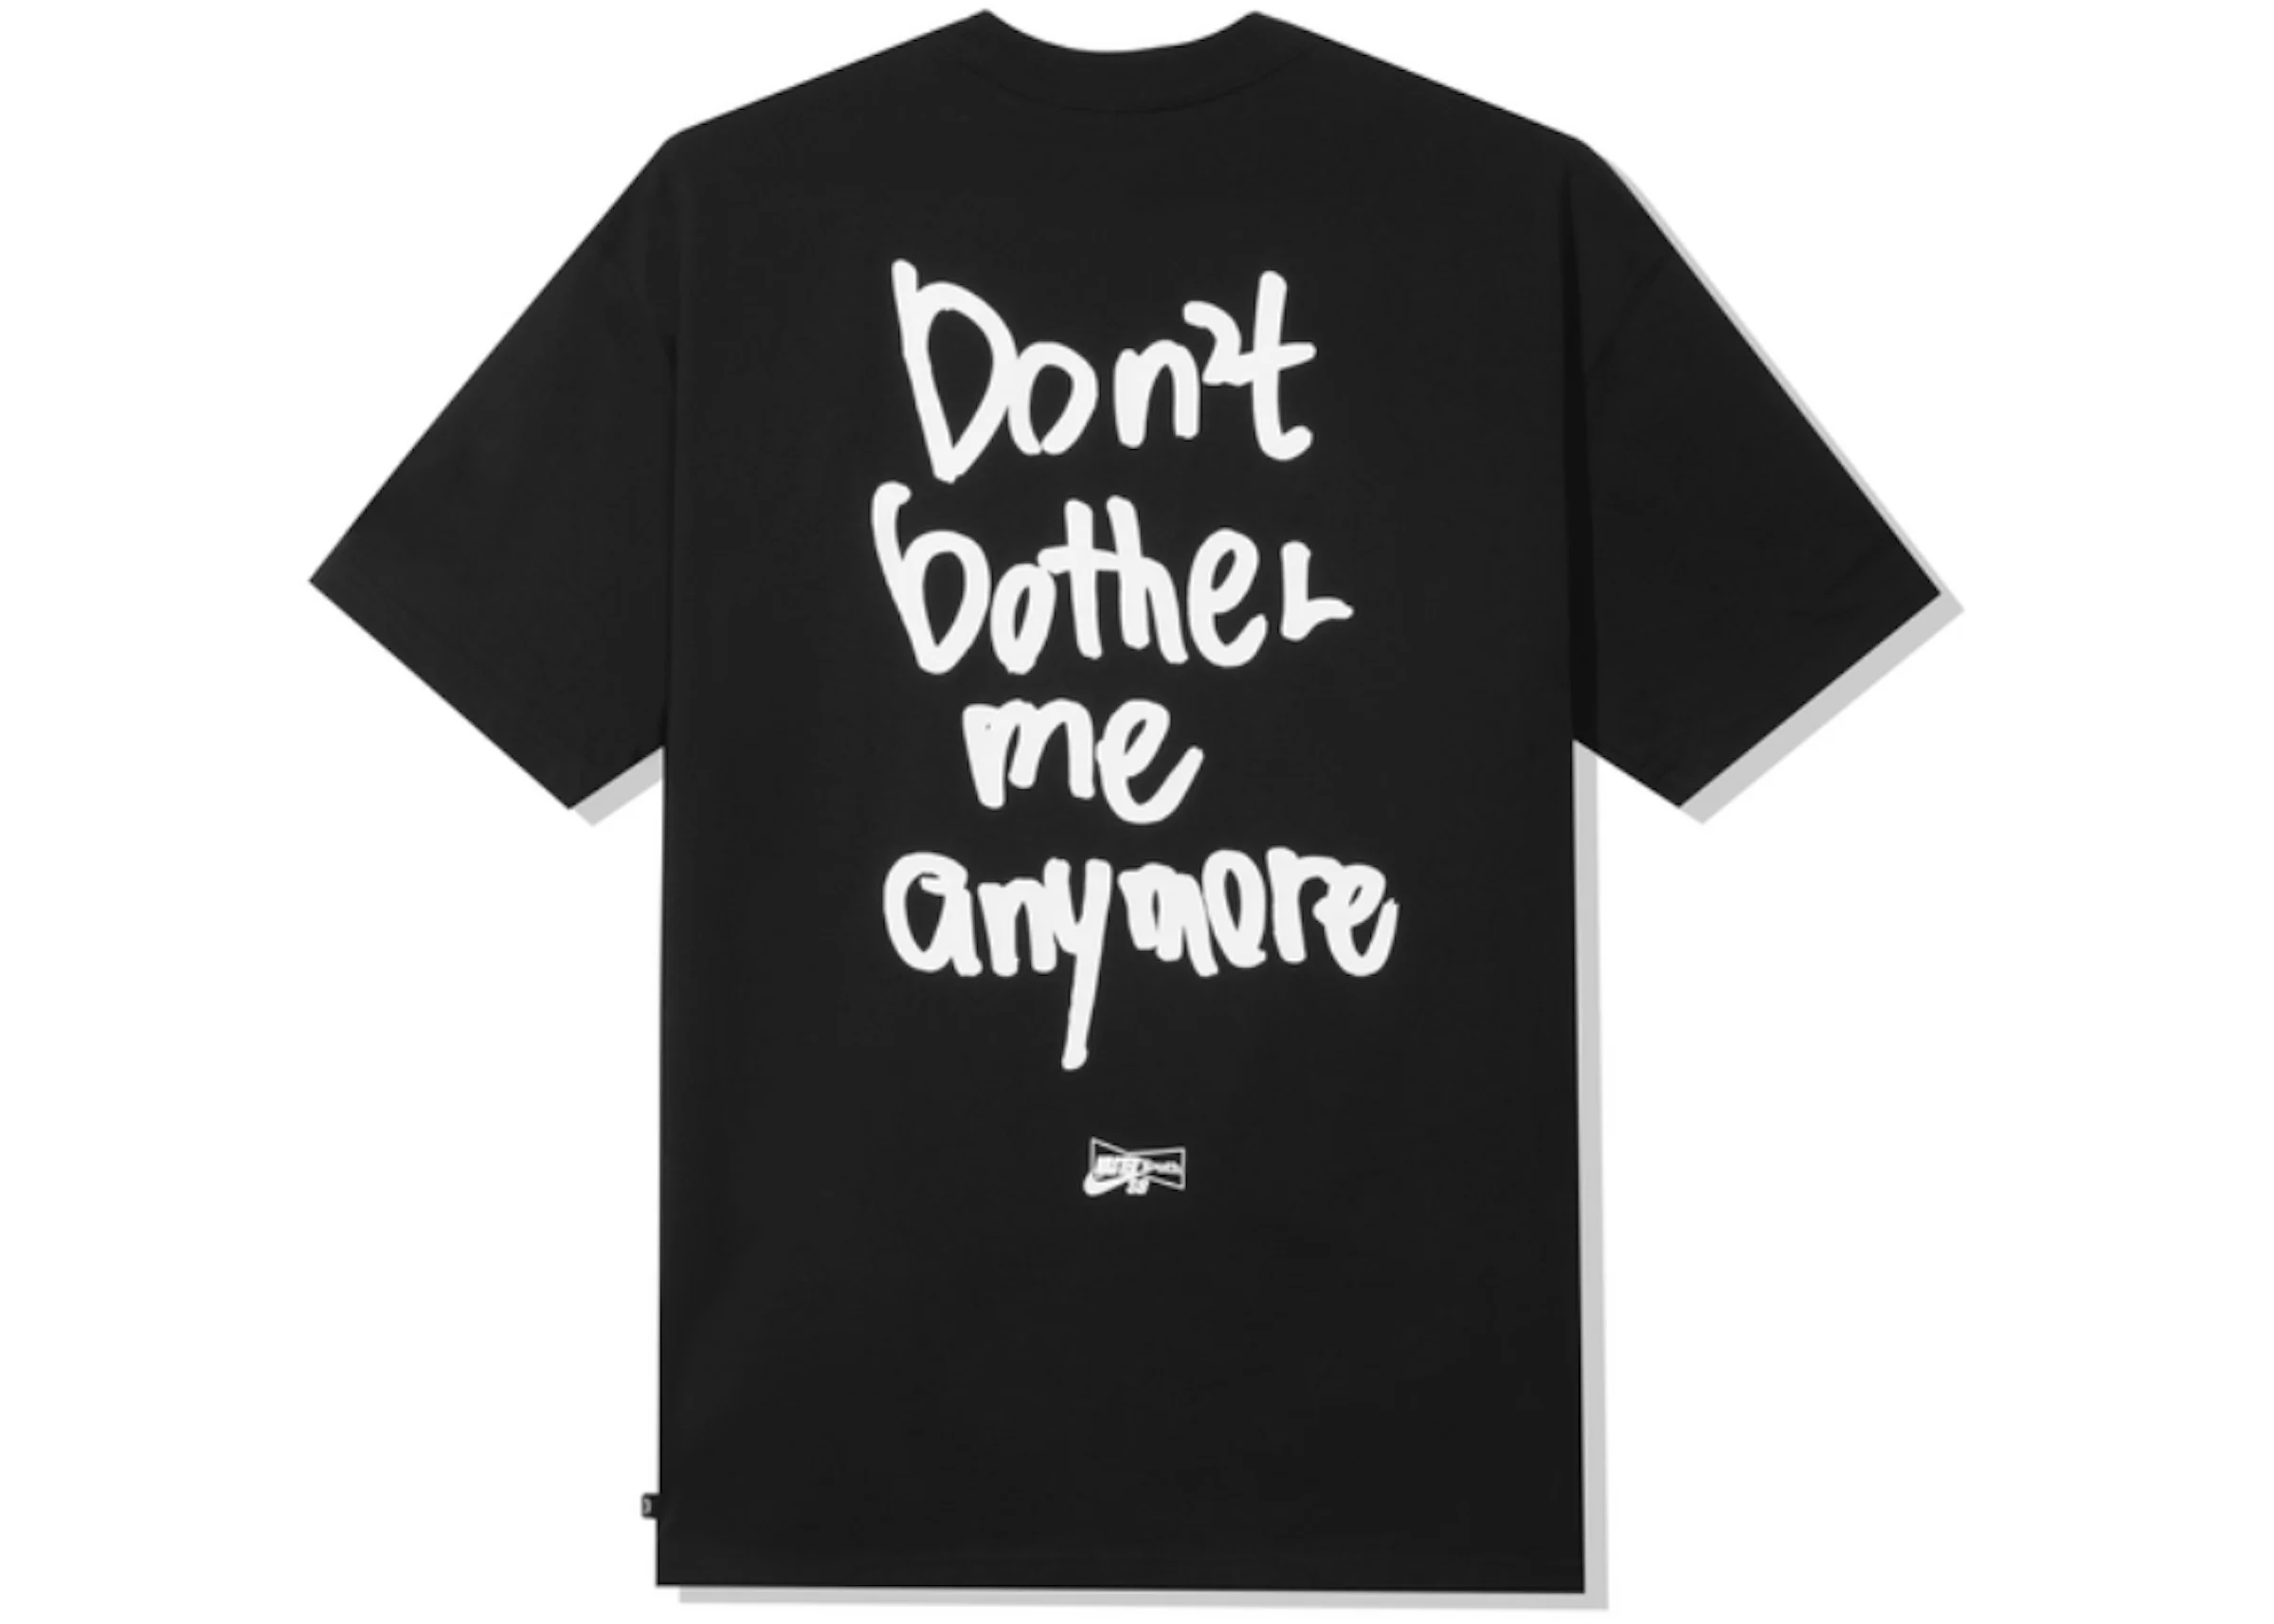 Nike x Wasted Youth D.B.M.A. T-shirt Black Men's - SS21 - US